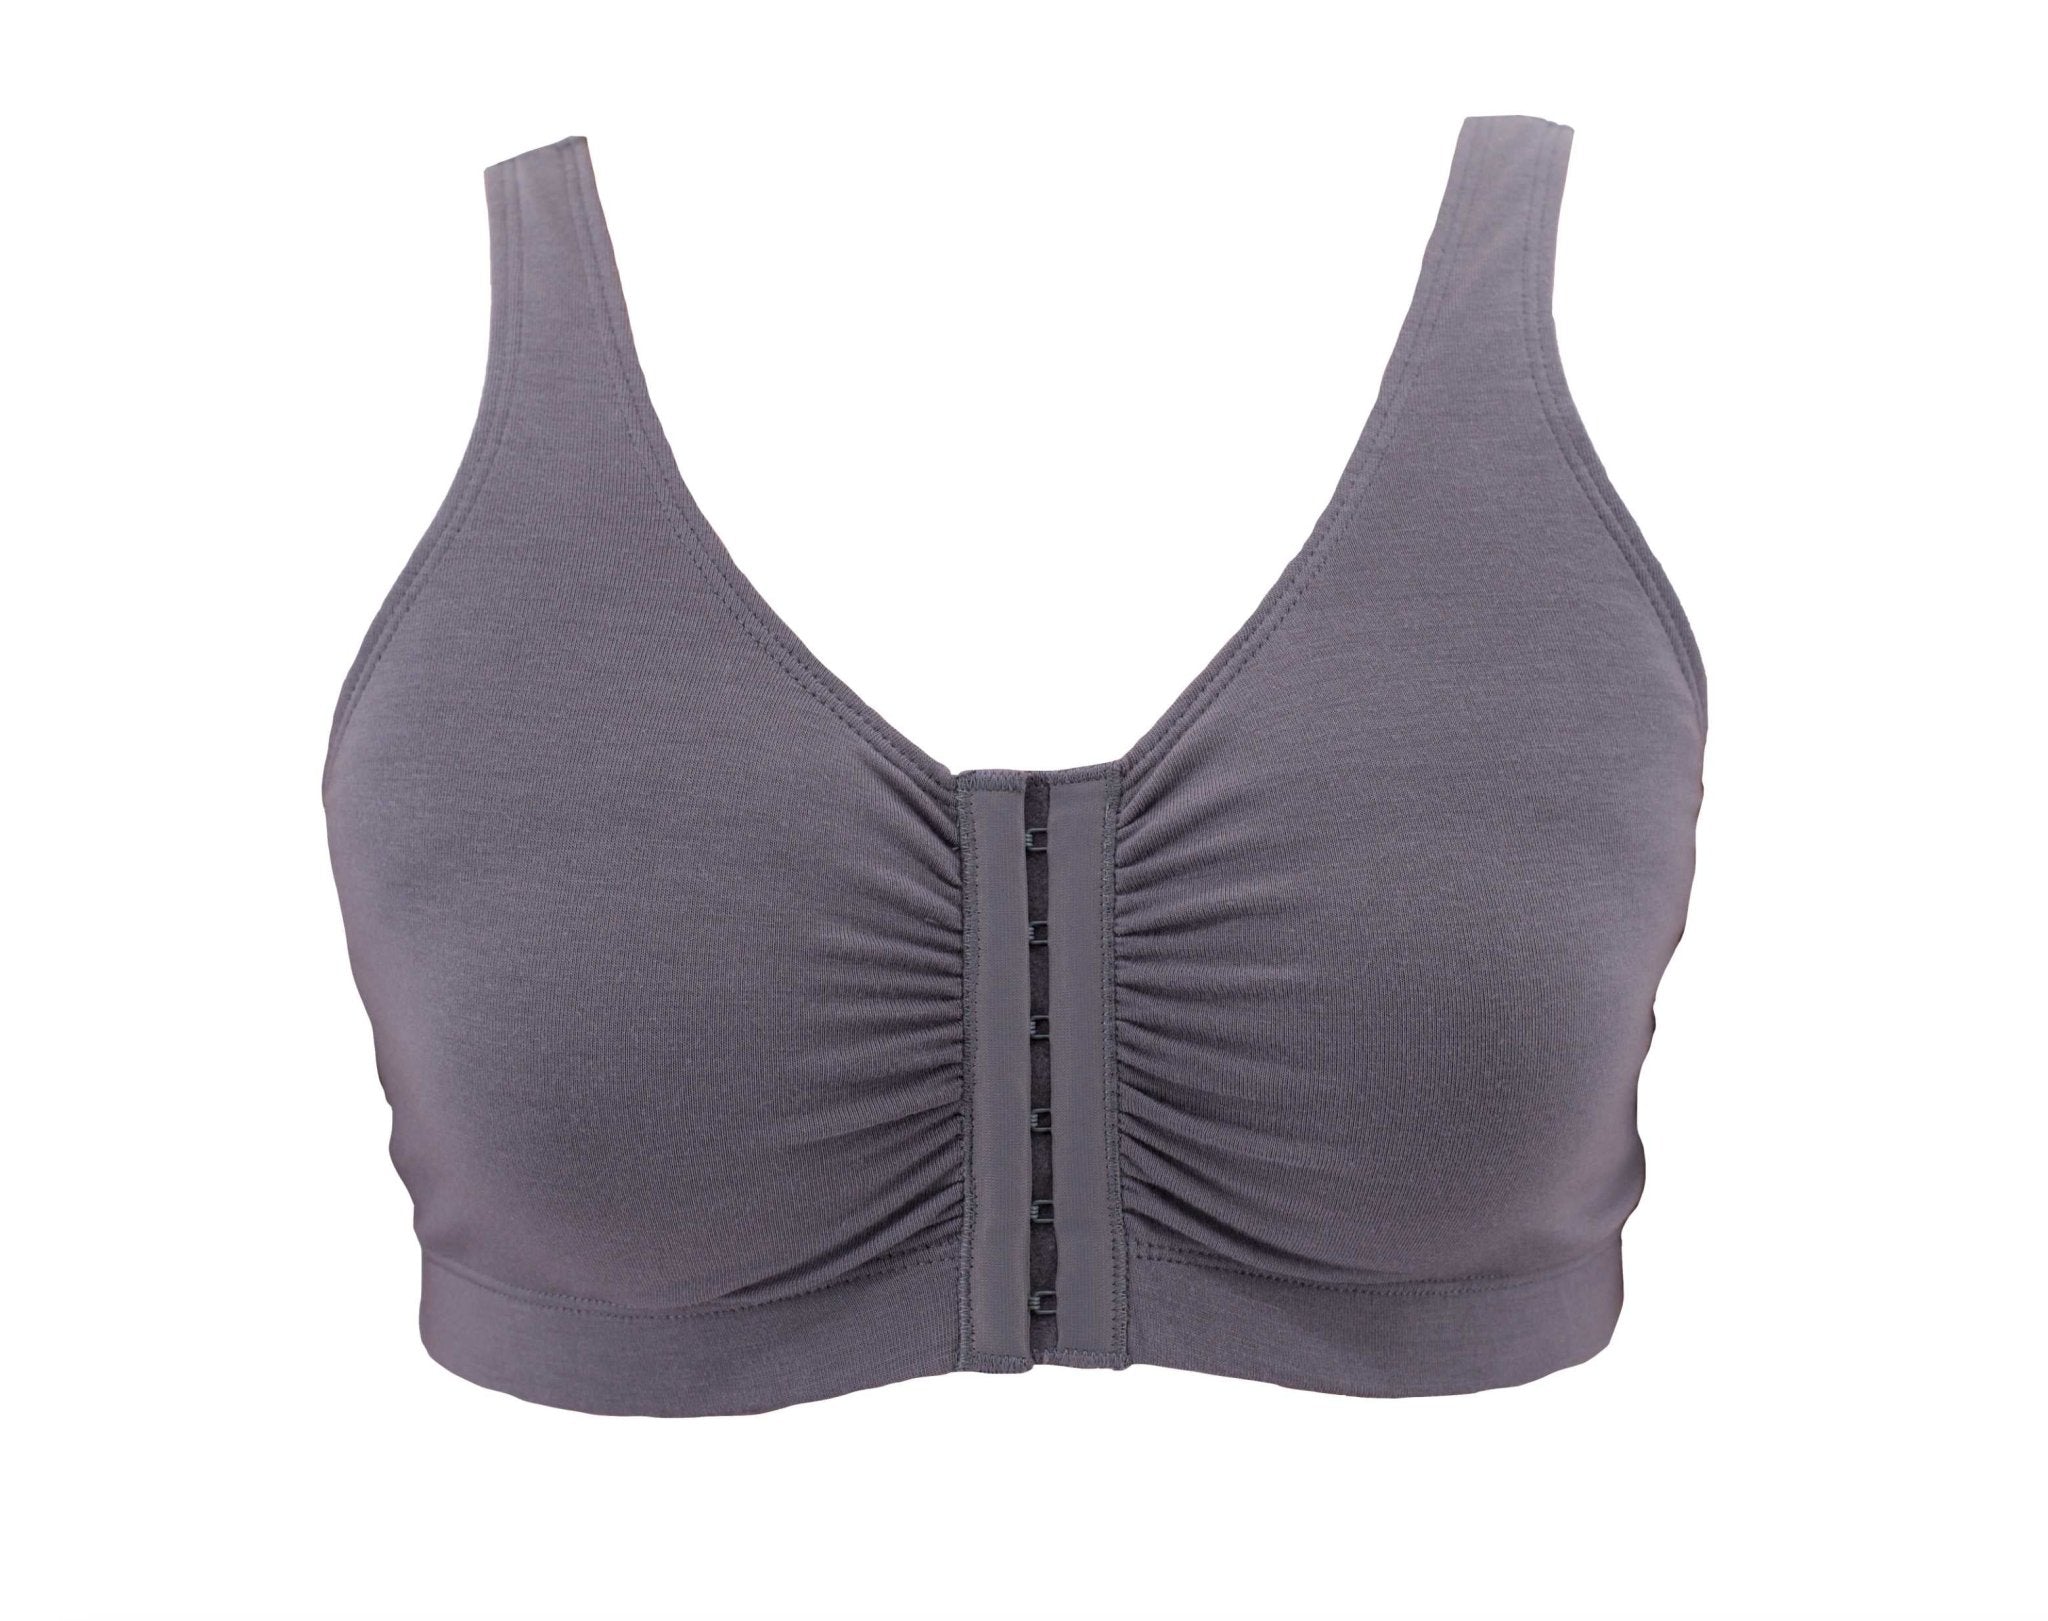 Fruit of the Loom Women's Comfort Front Close Sport Bra with Mesh